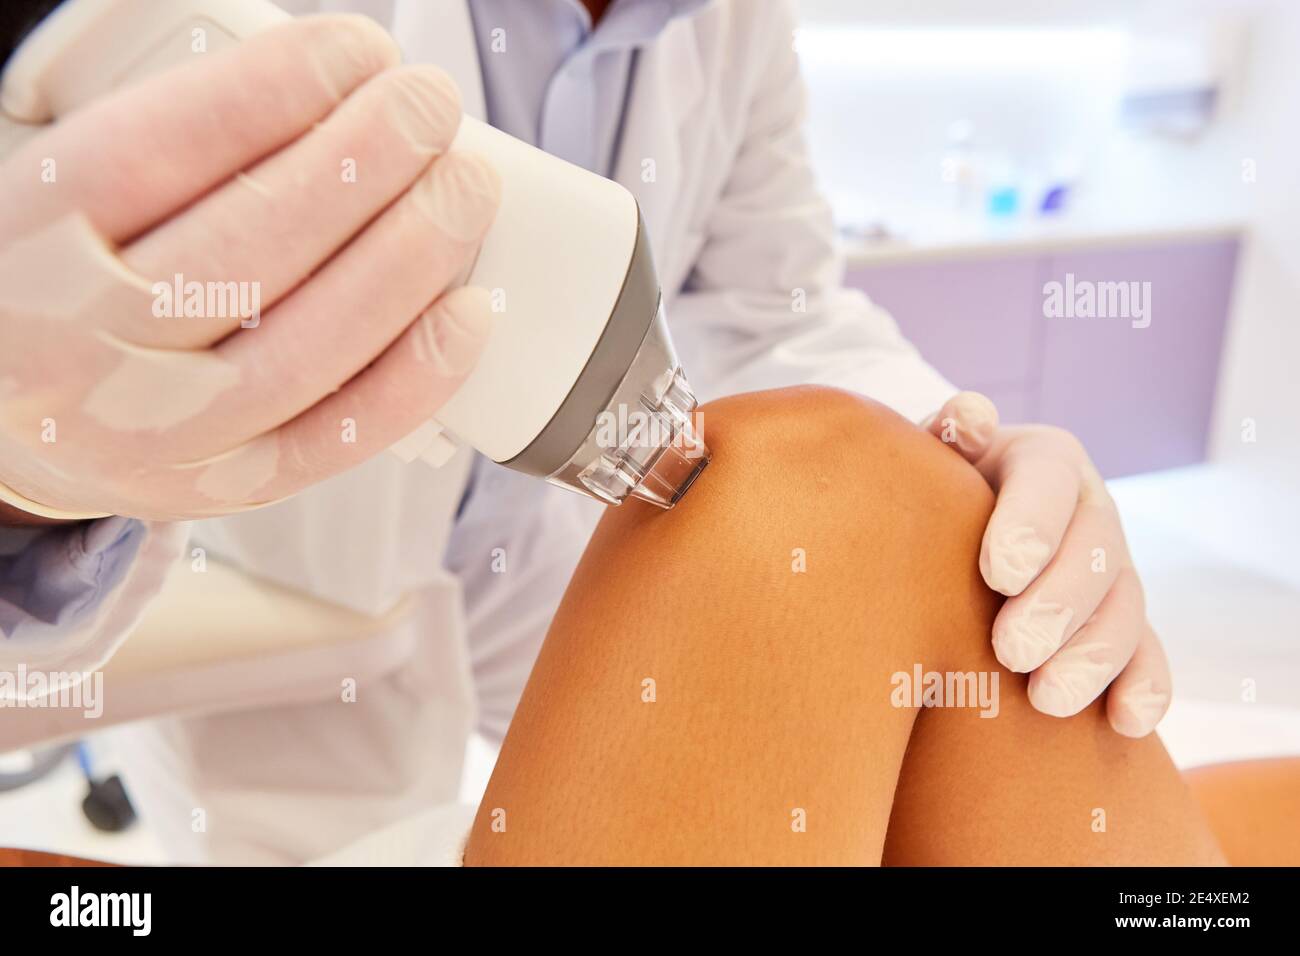 Skin tightening and rejuvenation on the thigh with Fraxel laser therapy Stock Photo